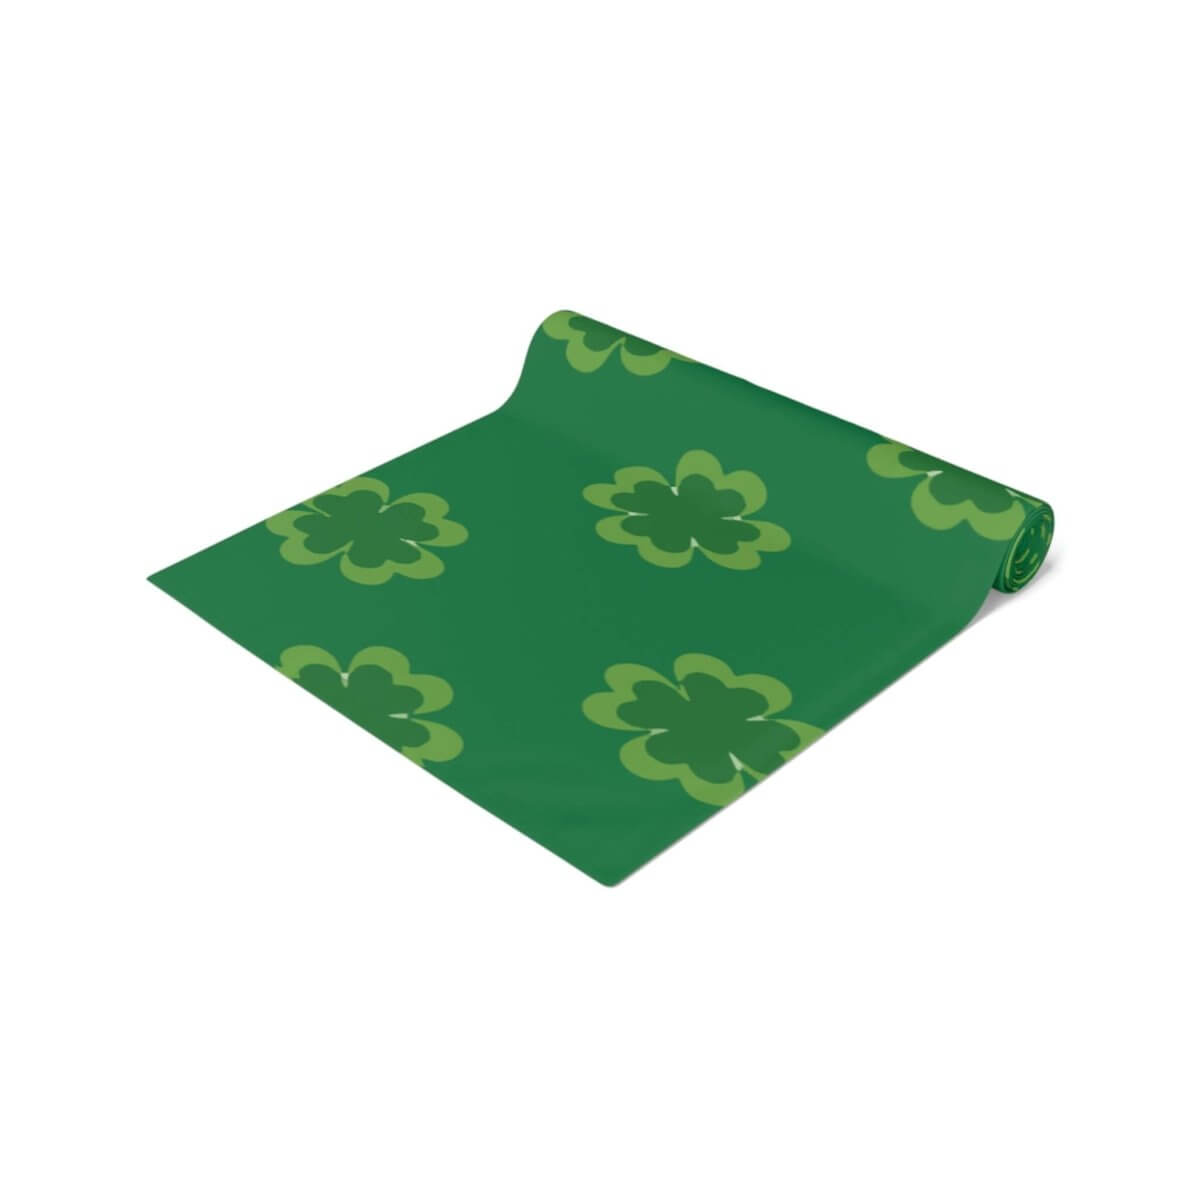 St. Patty's Table Runner (Cotton, Poly) - Hearth Home & Living